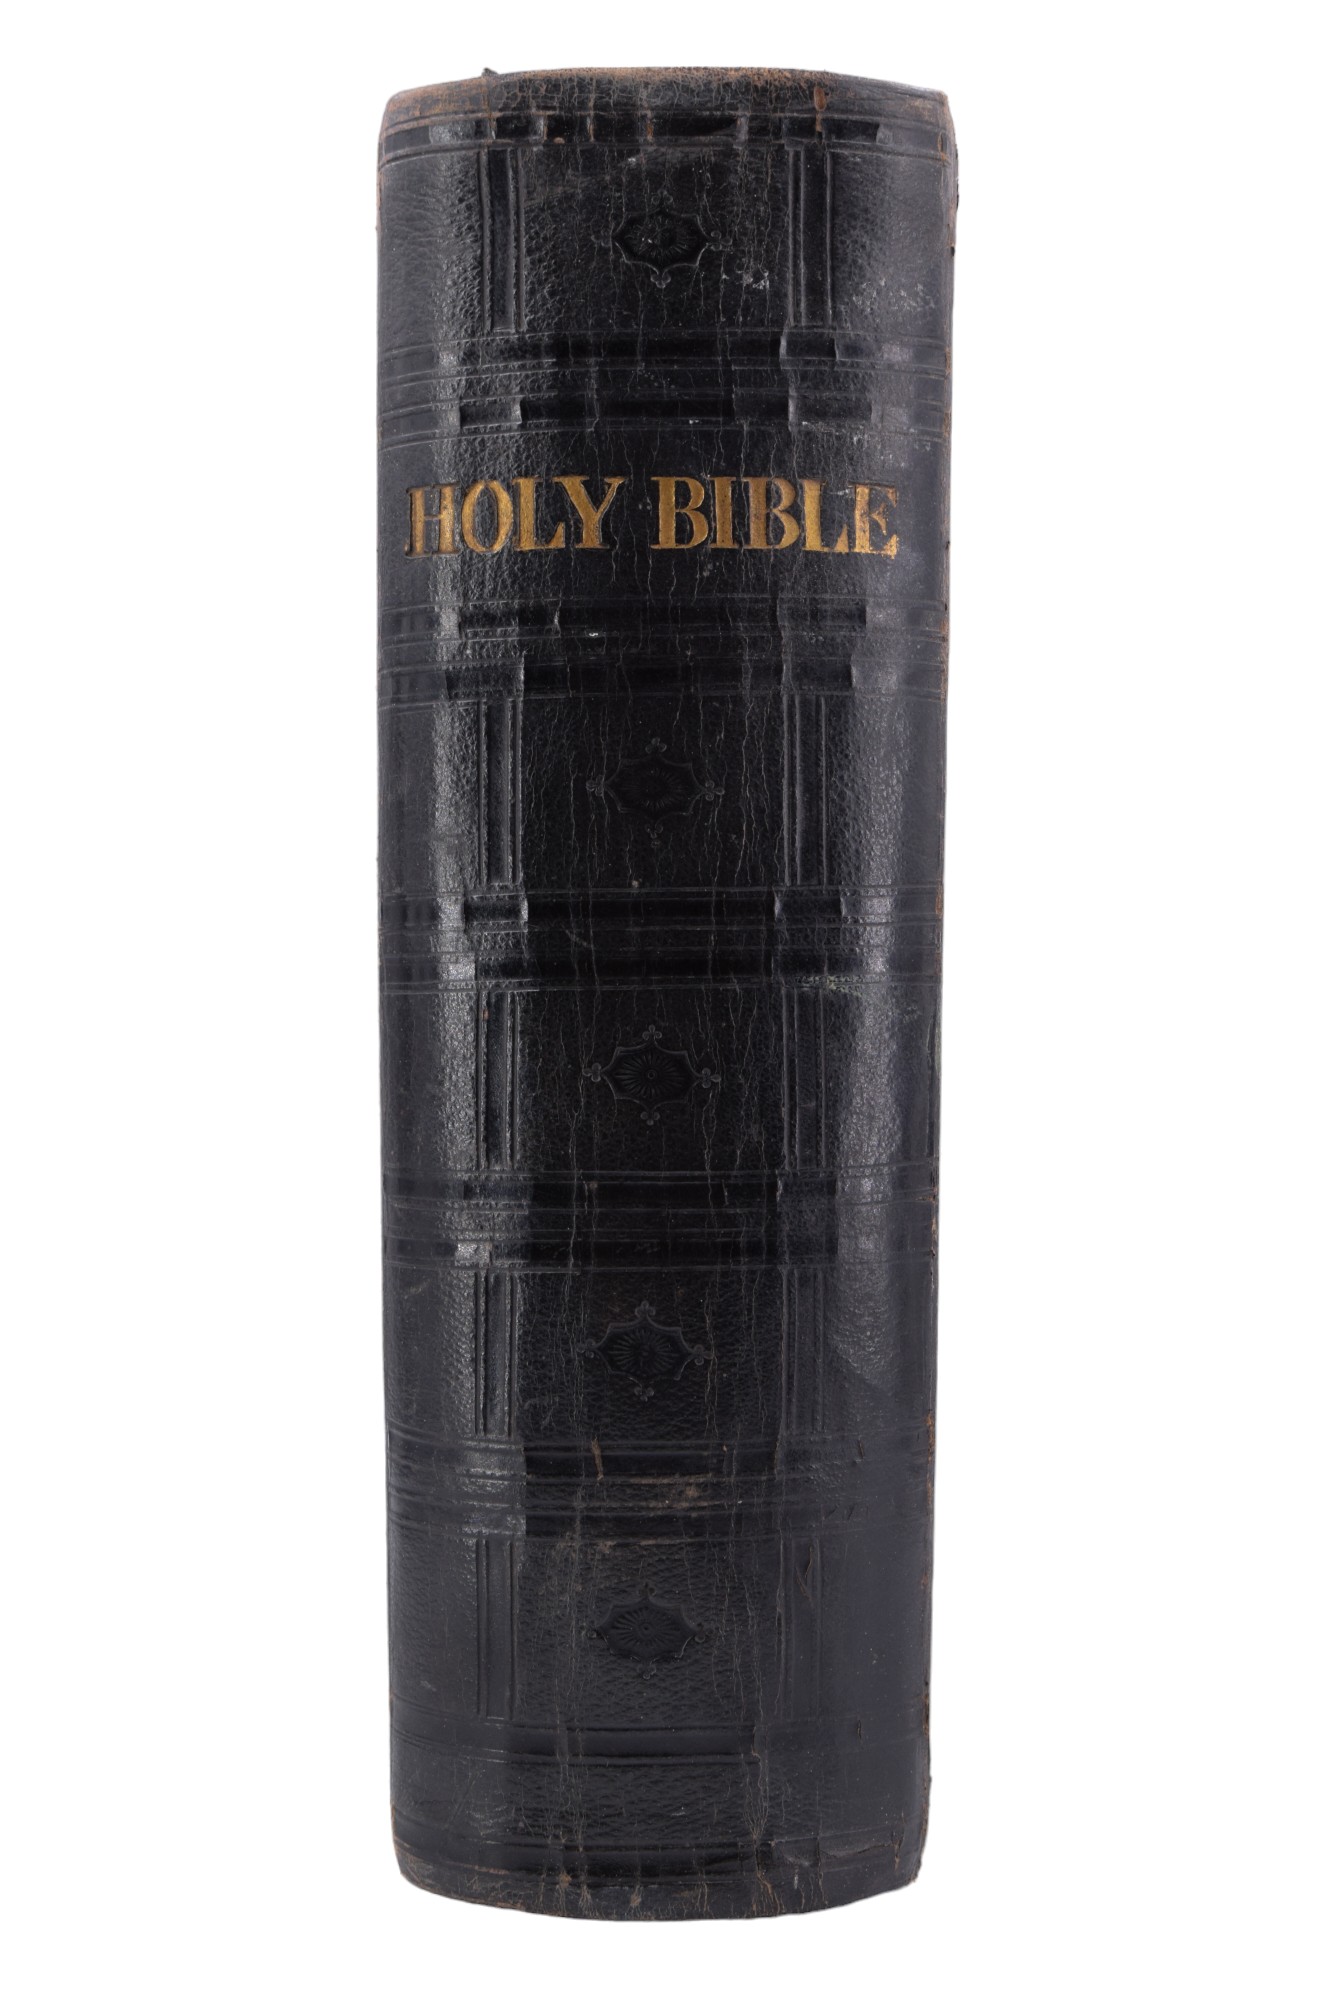 A Victorian Family Bible by Cassell, Petter and Galpin, full calf with gilt tooled lettering - Image 2 of 9